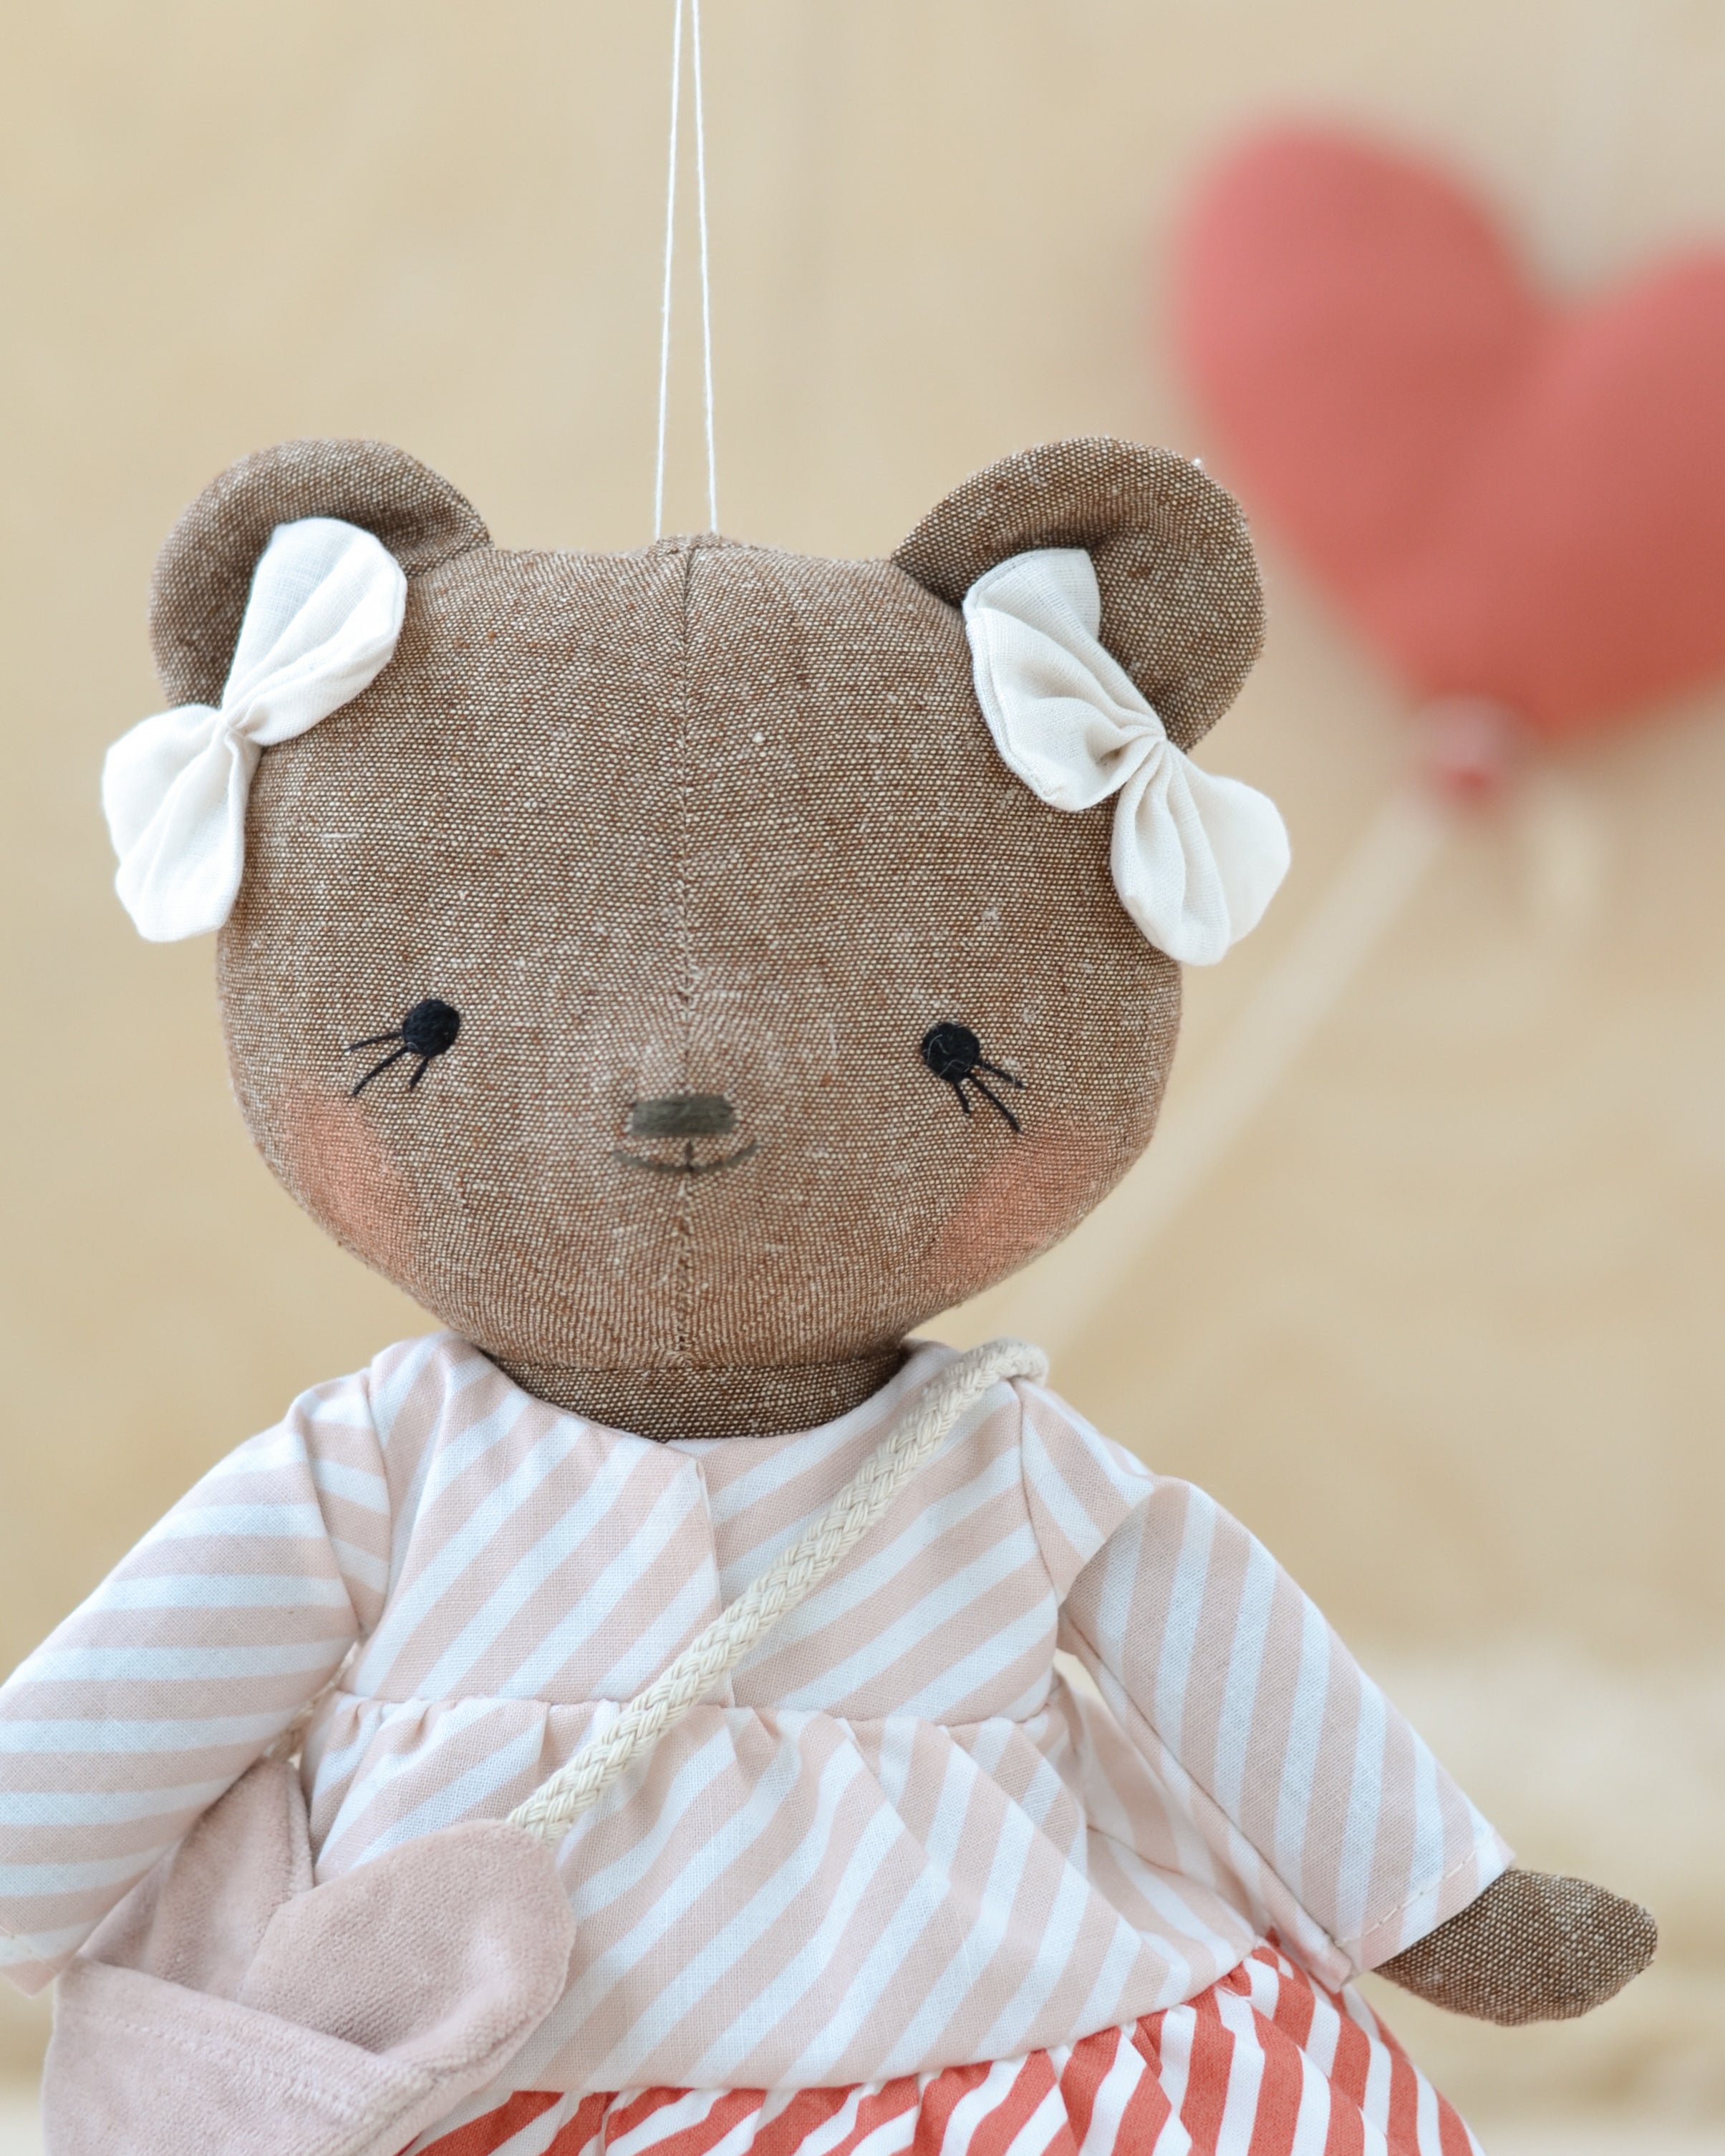 Bear Soft Toy Charlotte Love outfit